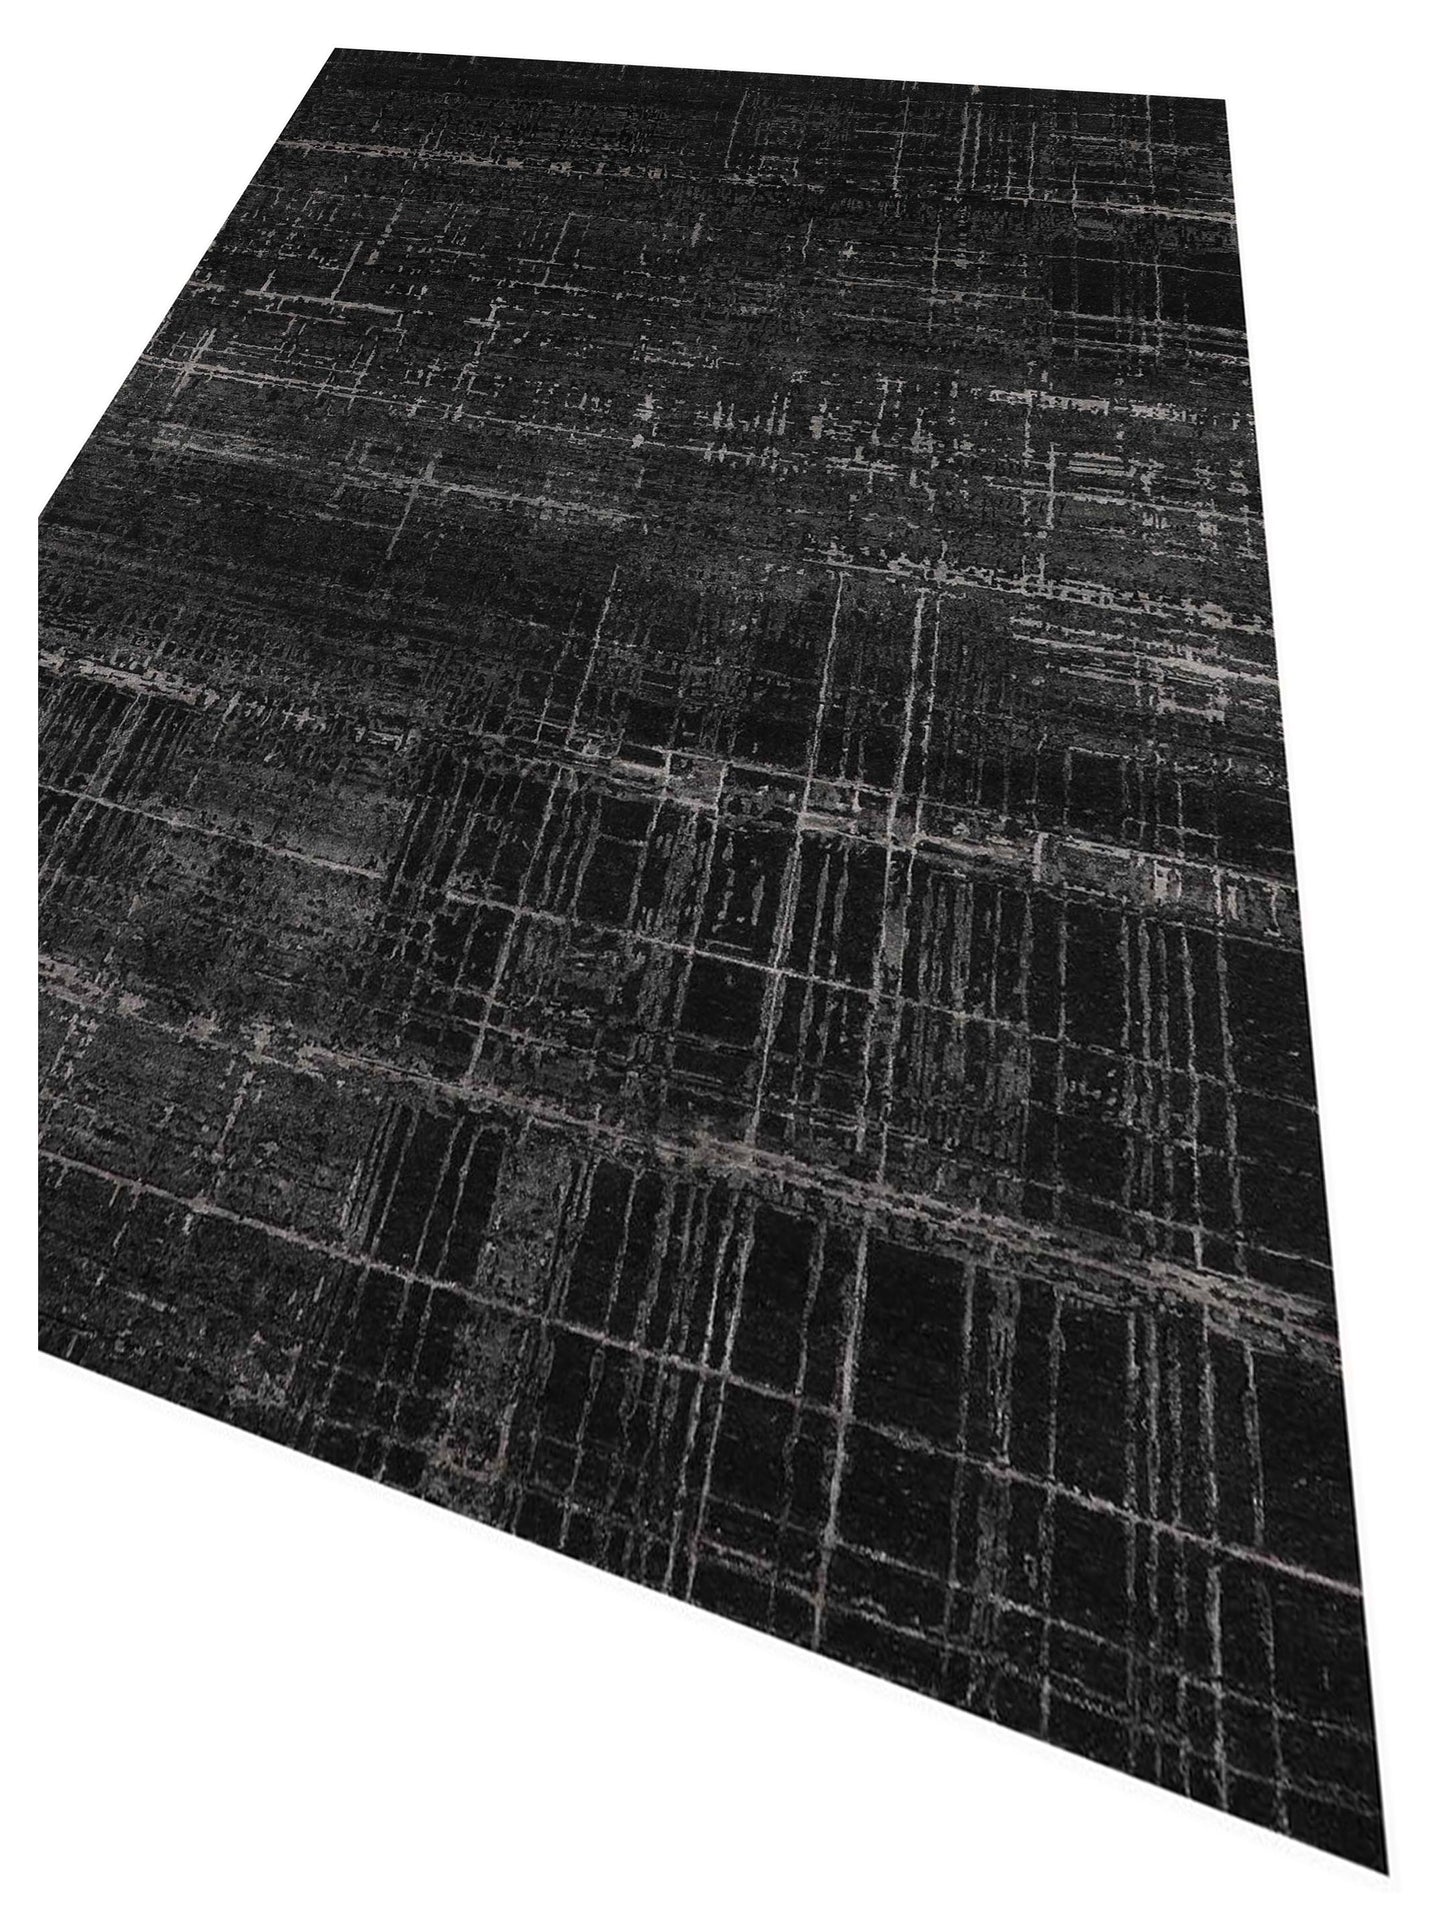 Artisan Mary  Charcoal  Contemporary Knotted Rug